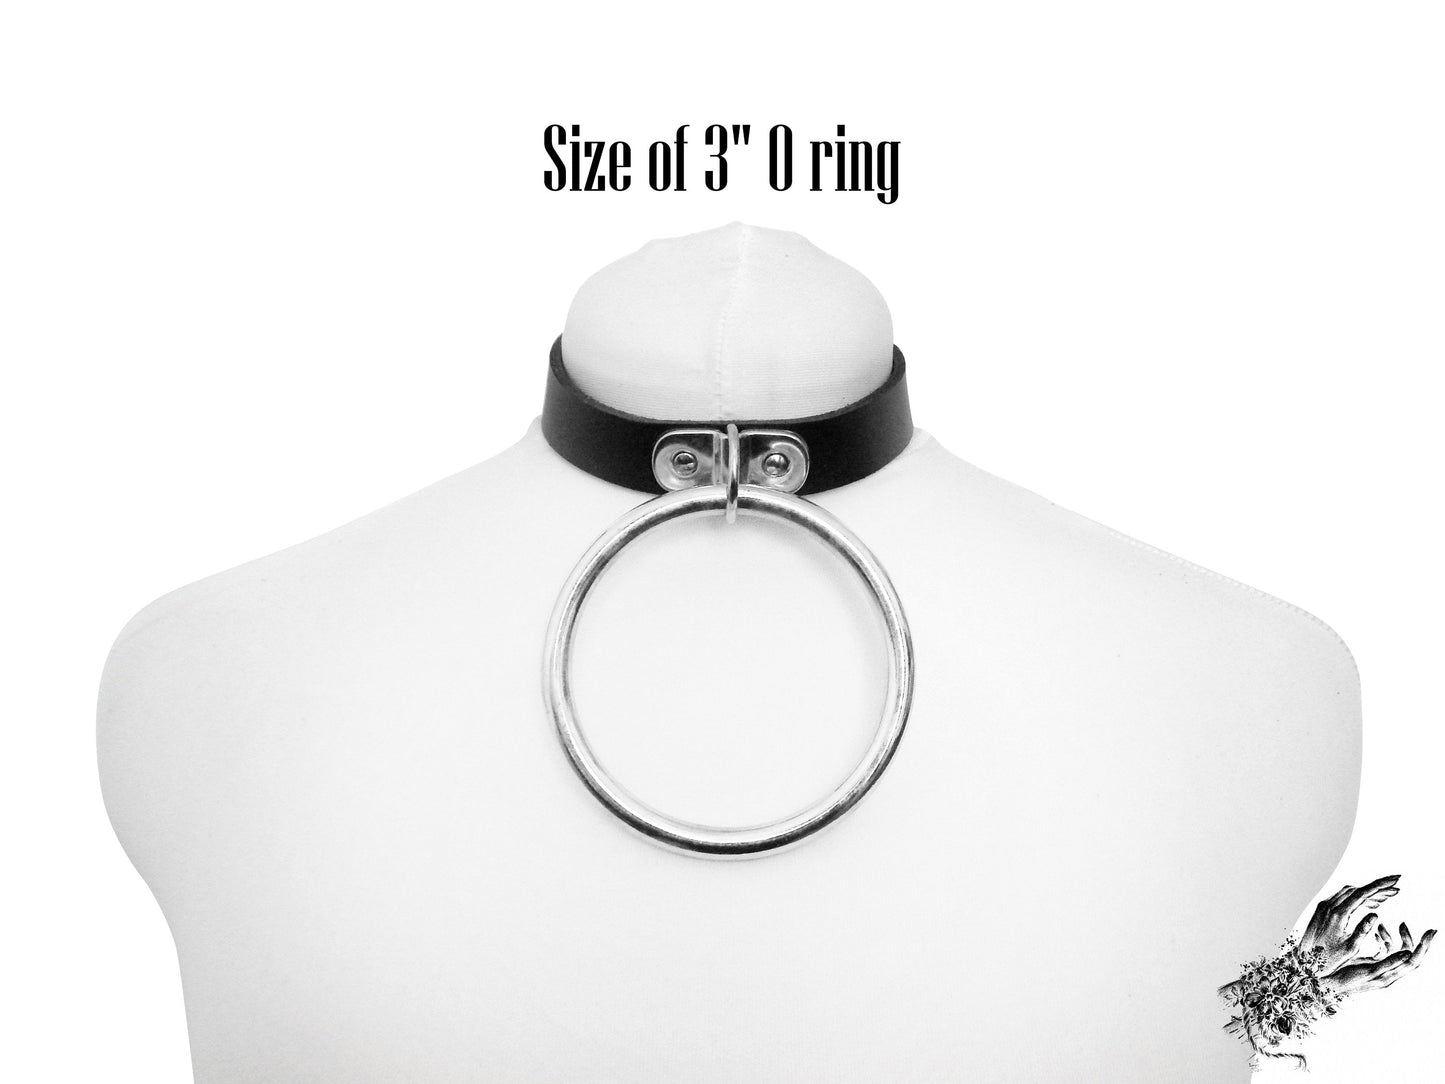 Pink Studded D and O Ring Choker with 2" O Ring - REGULAR SIZE